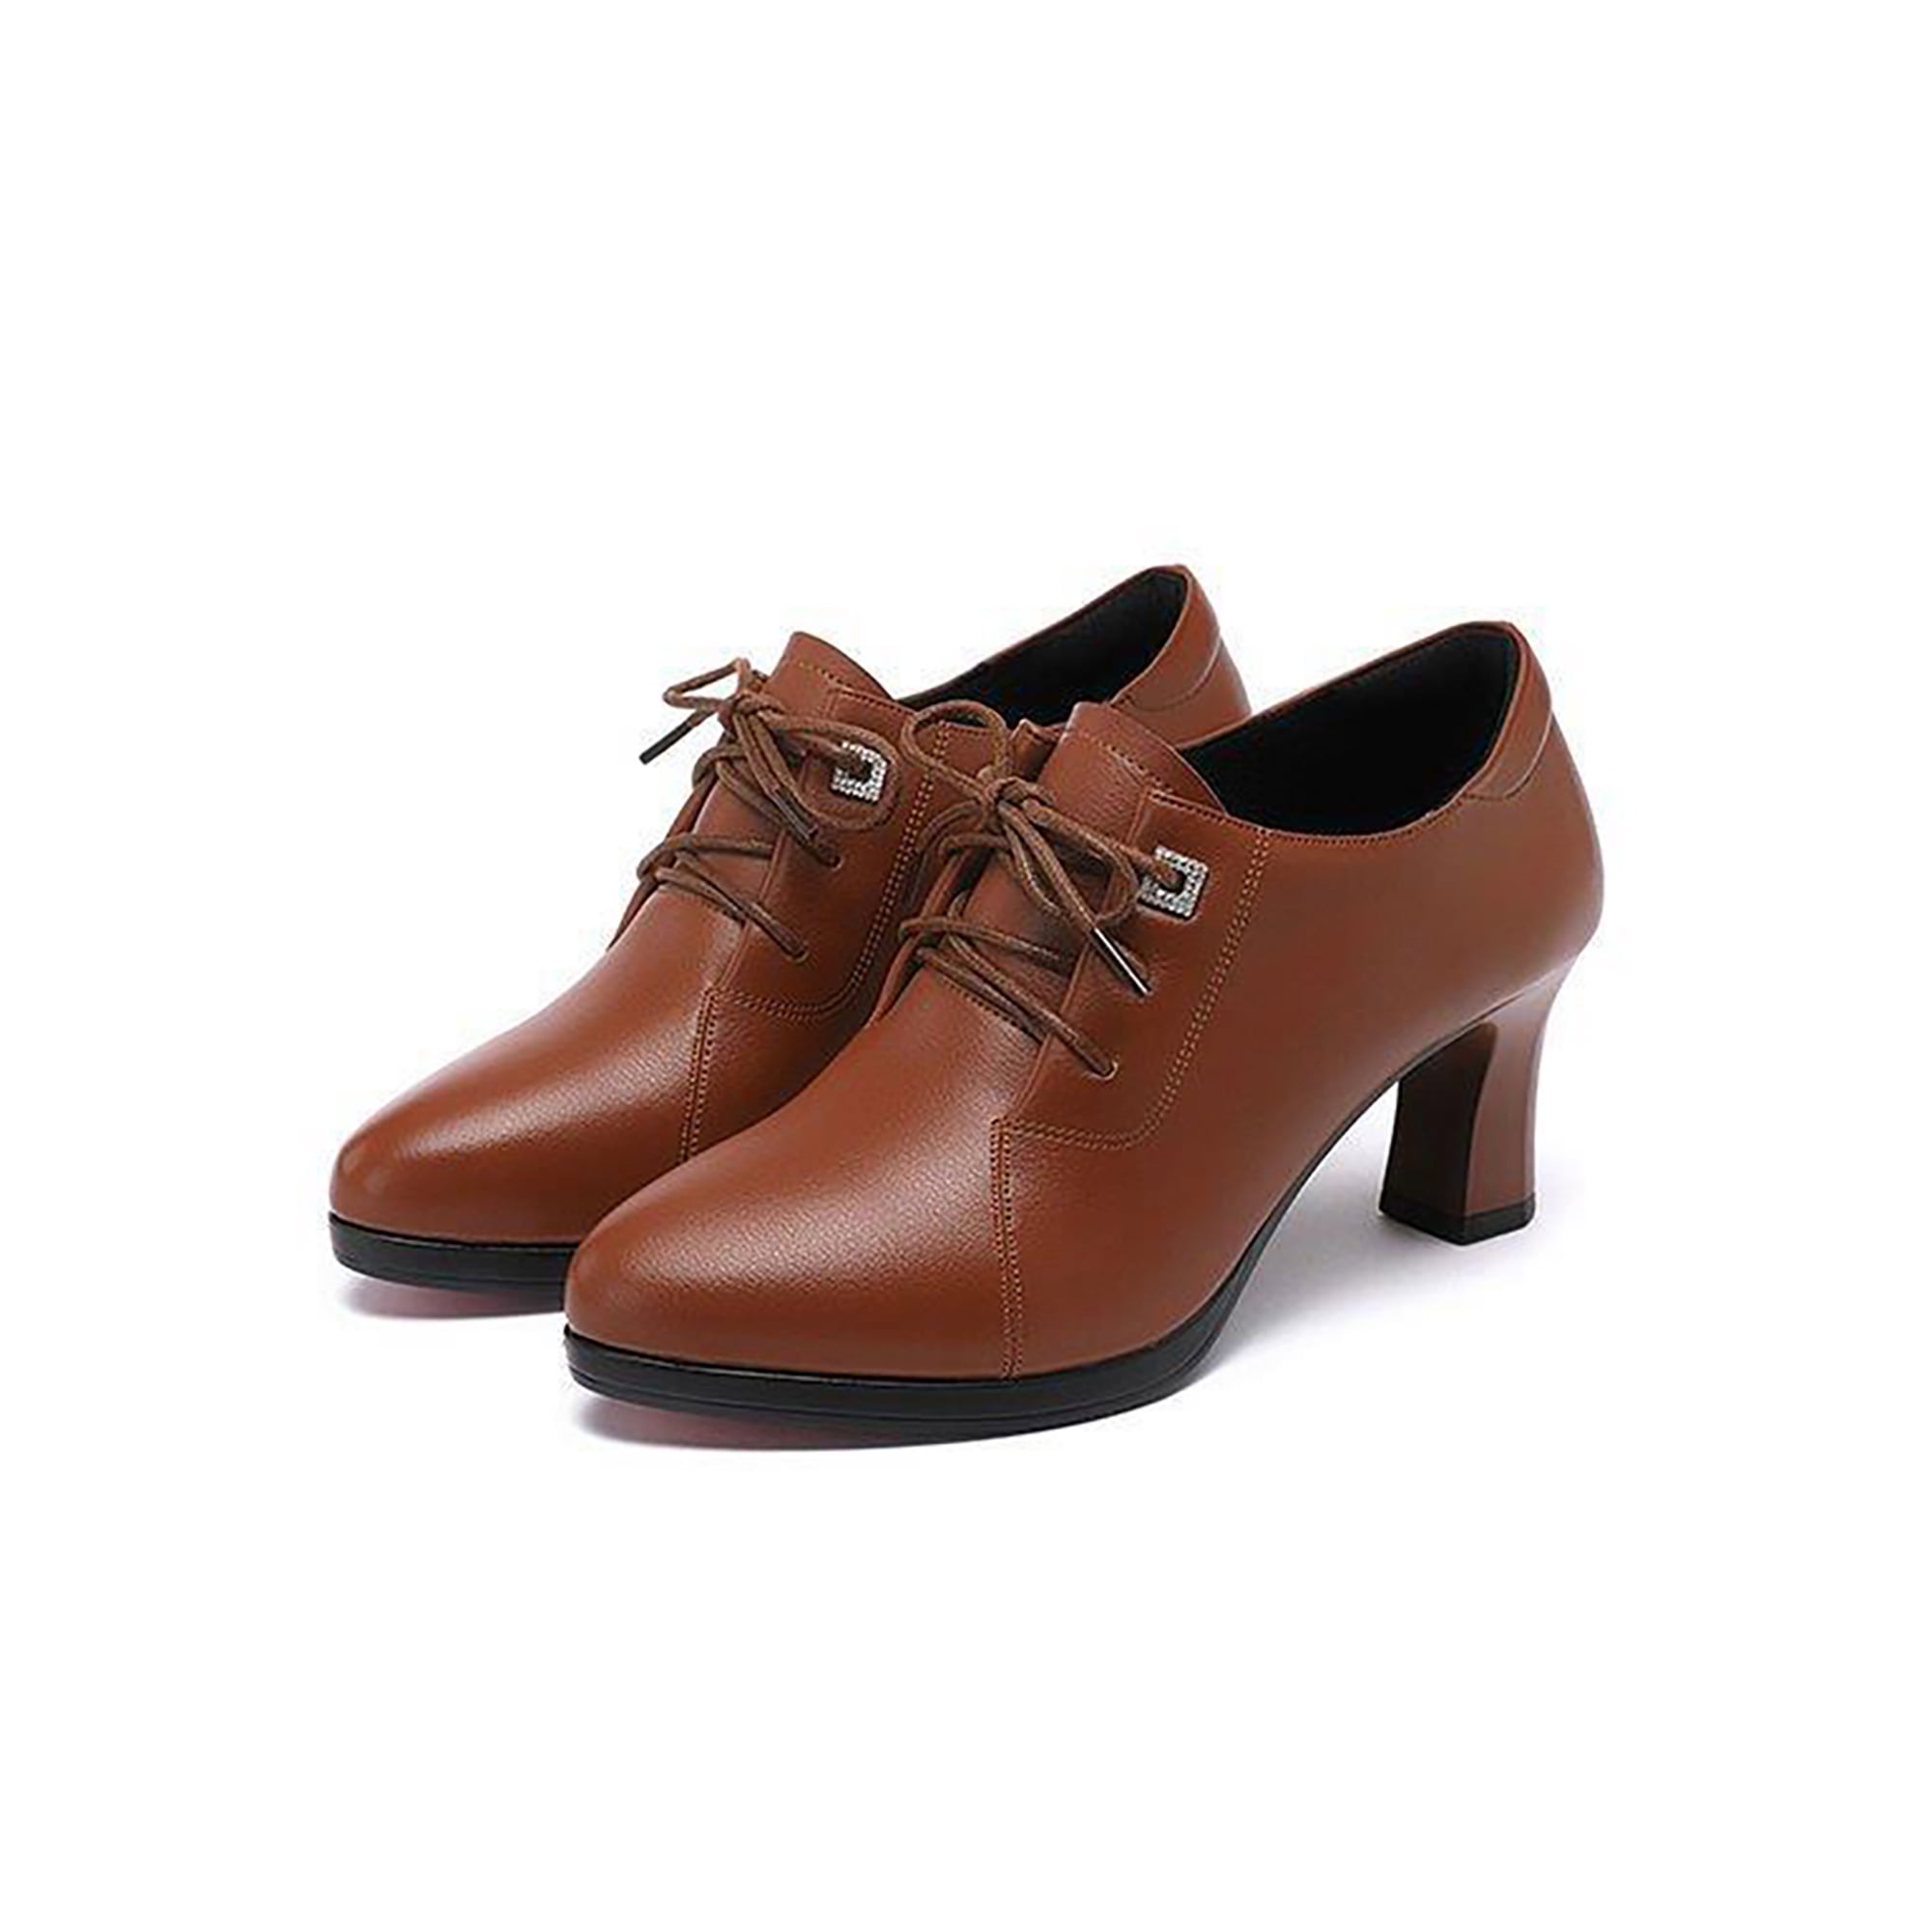 How To Style Derby Shoes - Women's Fashion